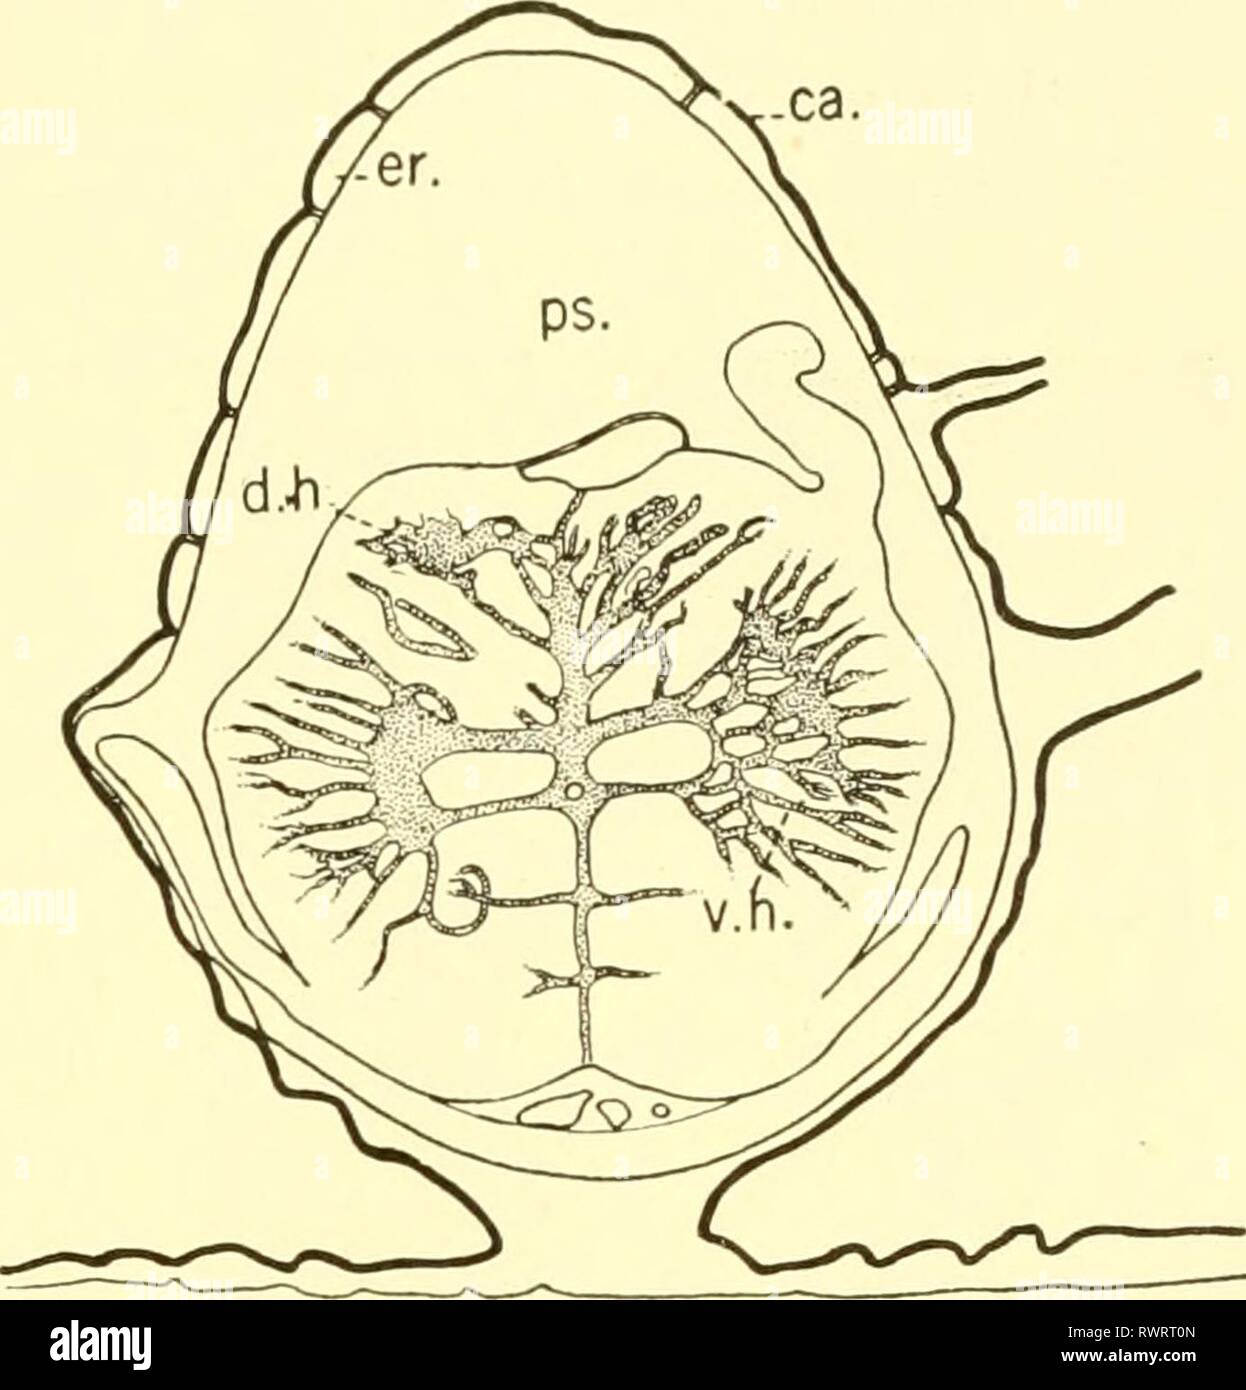 The elasmobranch fishes (1934) The elasmobranch fishes elasmobranchfish03dani Year: 1934  A B Fig. 217. Transverse sections of the spinal cord. (From Sterzi.) A. Acanthias vulgaris. B. Baja clavata. ca., calcification; d.li., dorsal horn; d.r., dorsal root; er., endorachis; nc, neurocoele; pm., paracentral mass; ps., perimeningeal space; v.h., ventral horn. sixth nerve and the grey matter of the formatio-reticularis {f.r., fig. 216) is occupied in the cord by the ventral horn {v.h., fig. 217); while the general cutaneous nucleus of the medulla (g.c.n.) gives place to the dorsal horn of the cor Stock Photo